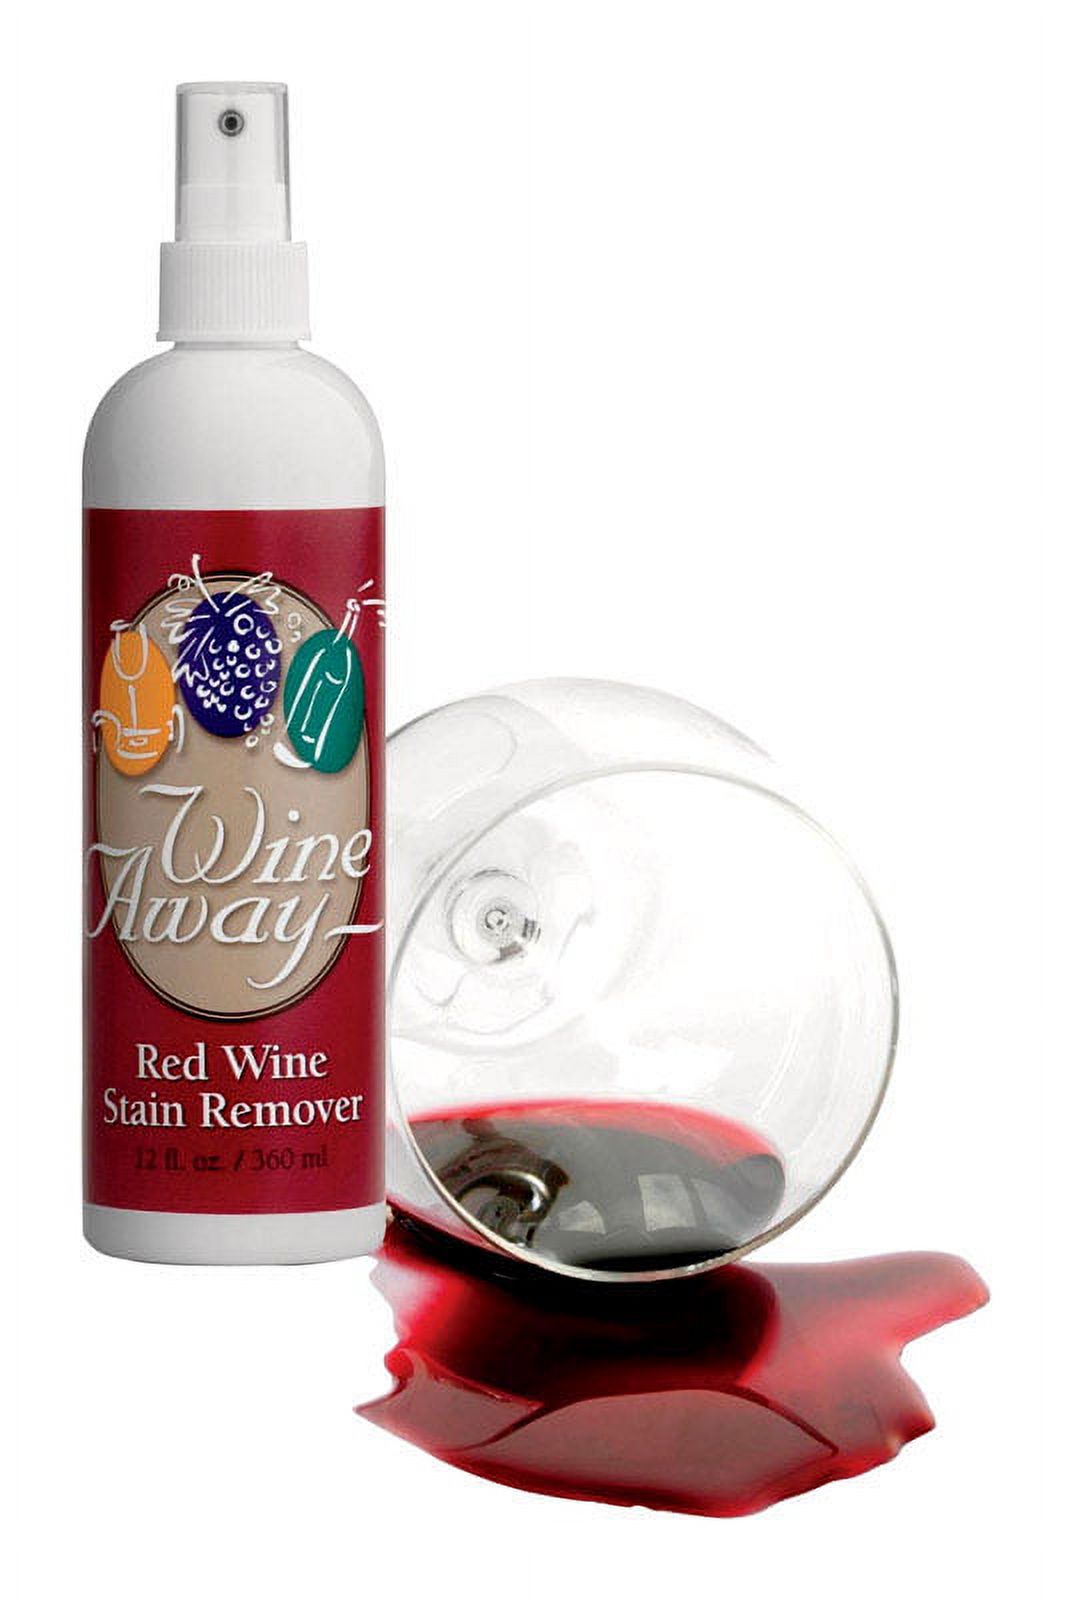 Evergreen Labs Wine Away Red Wine Stain Remover, 12 Fluid Ounce - image 3 of 3